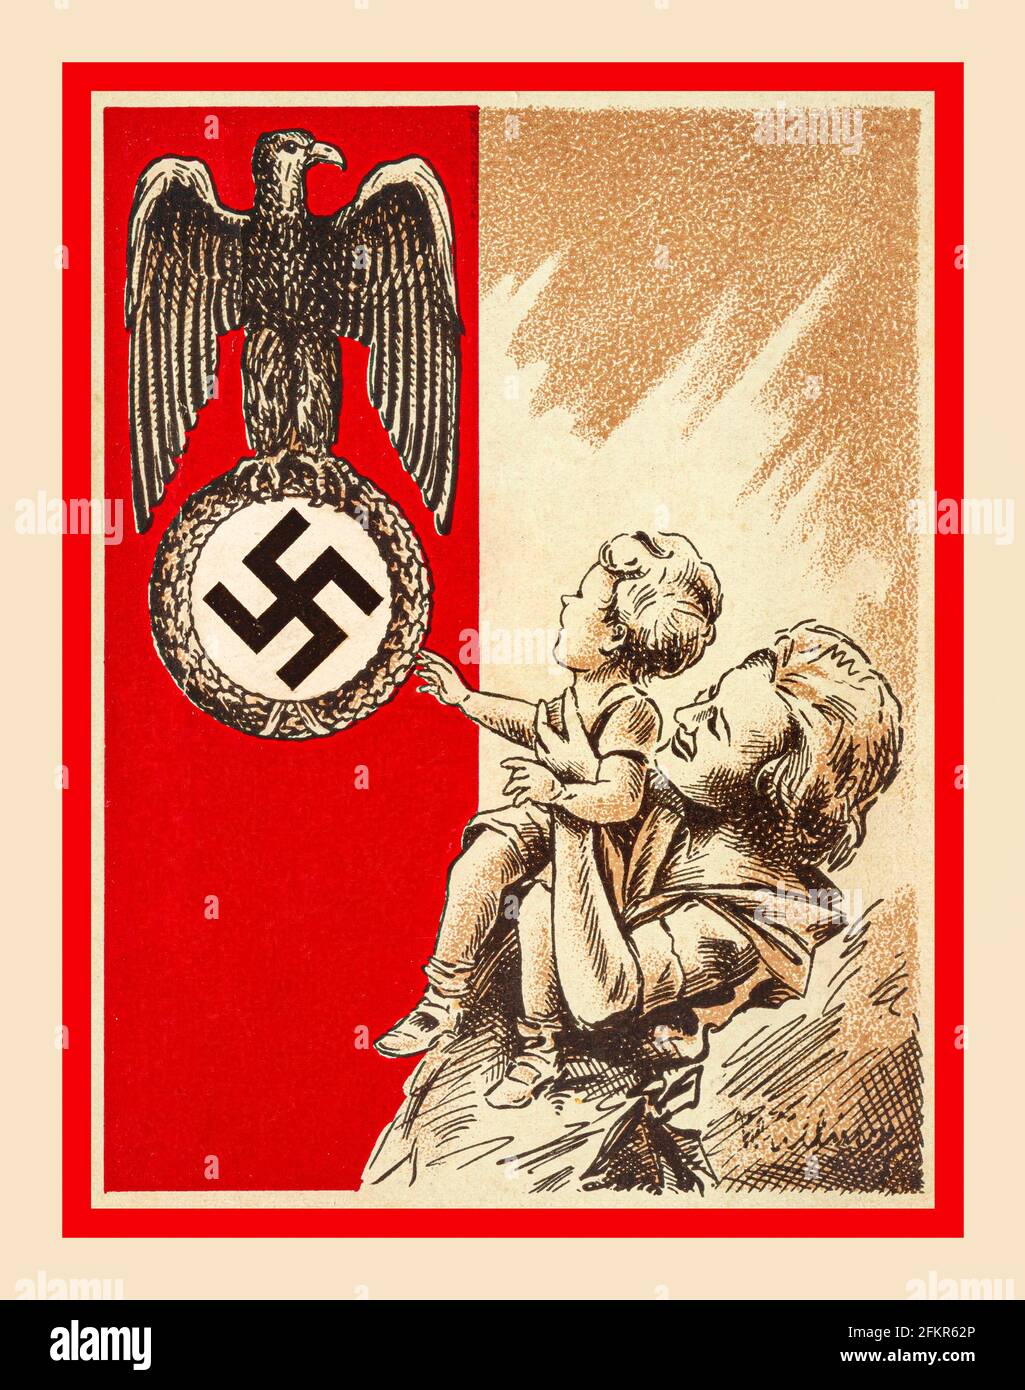 NAZI SWASTIKA FAMILY ADORATION 1939 Propaganda Postcard Nazi Germany showing a mother and child with the Fatherland Nazi Eagle and Swastika as a National Guardian Symbol to be revered respected and admired... Stock Photo